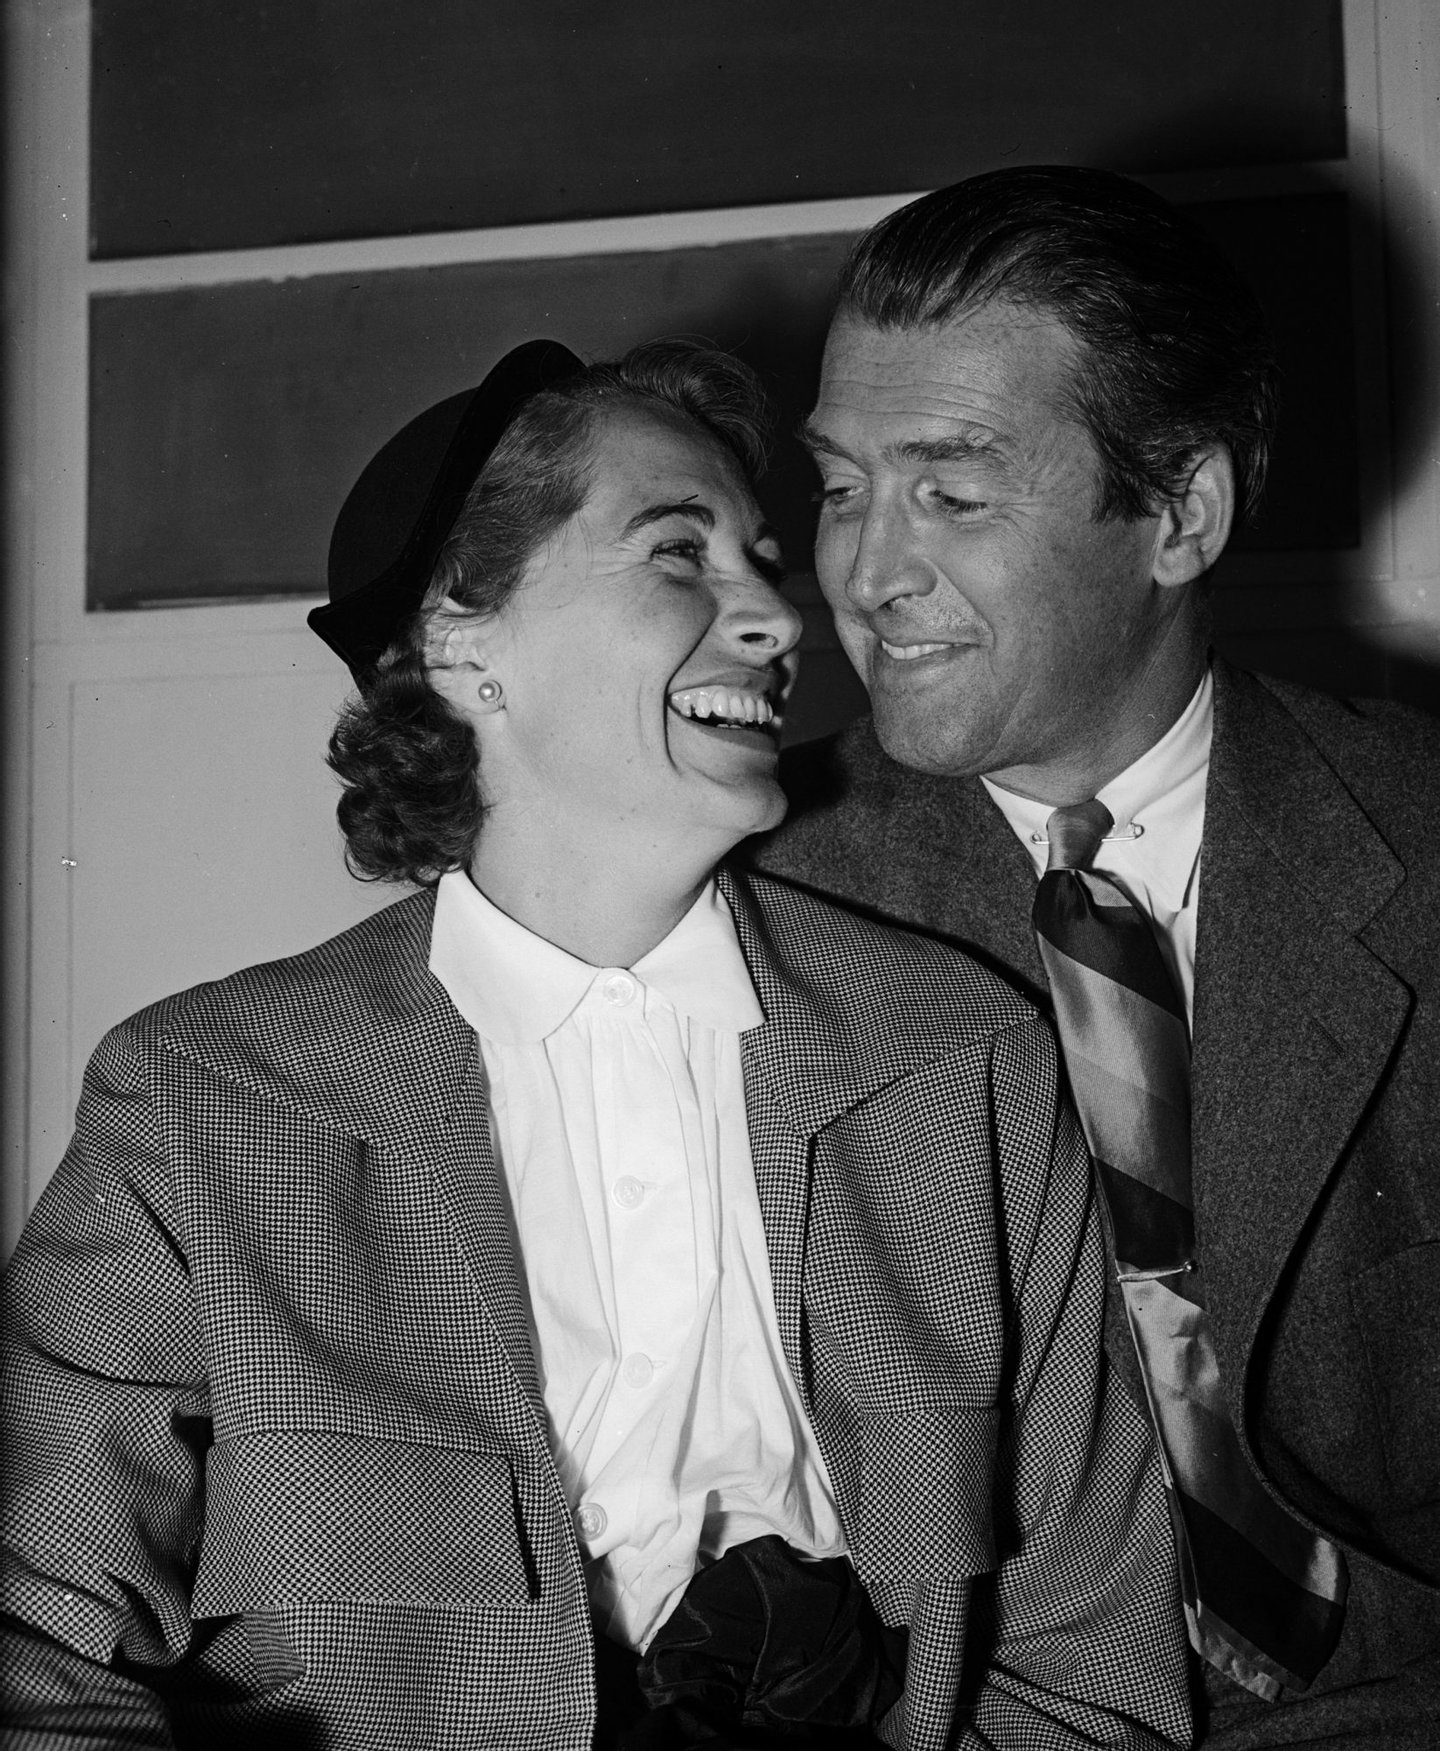 29th August 1950: Film star James Stewart (1908 - 1997) with his wife Gloria Hatricck McLean. (Photo by Harold Clements/Express/Getty Images)